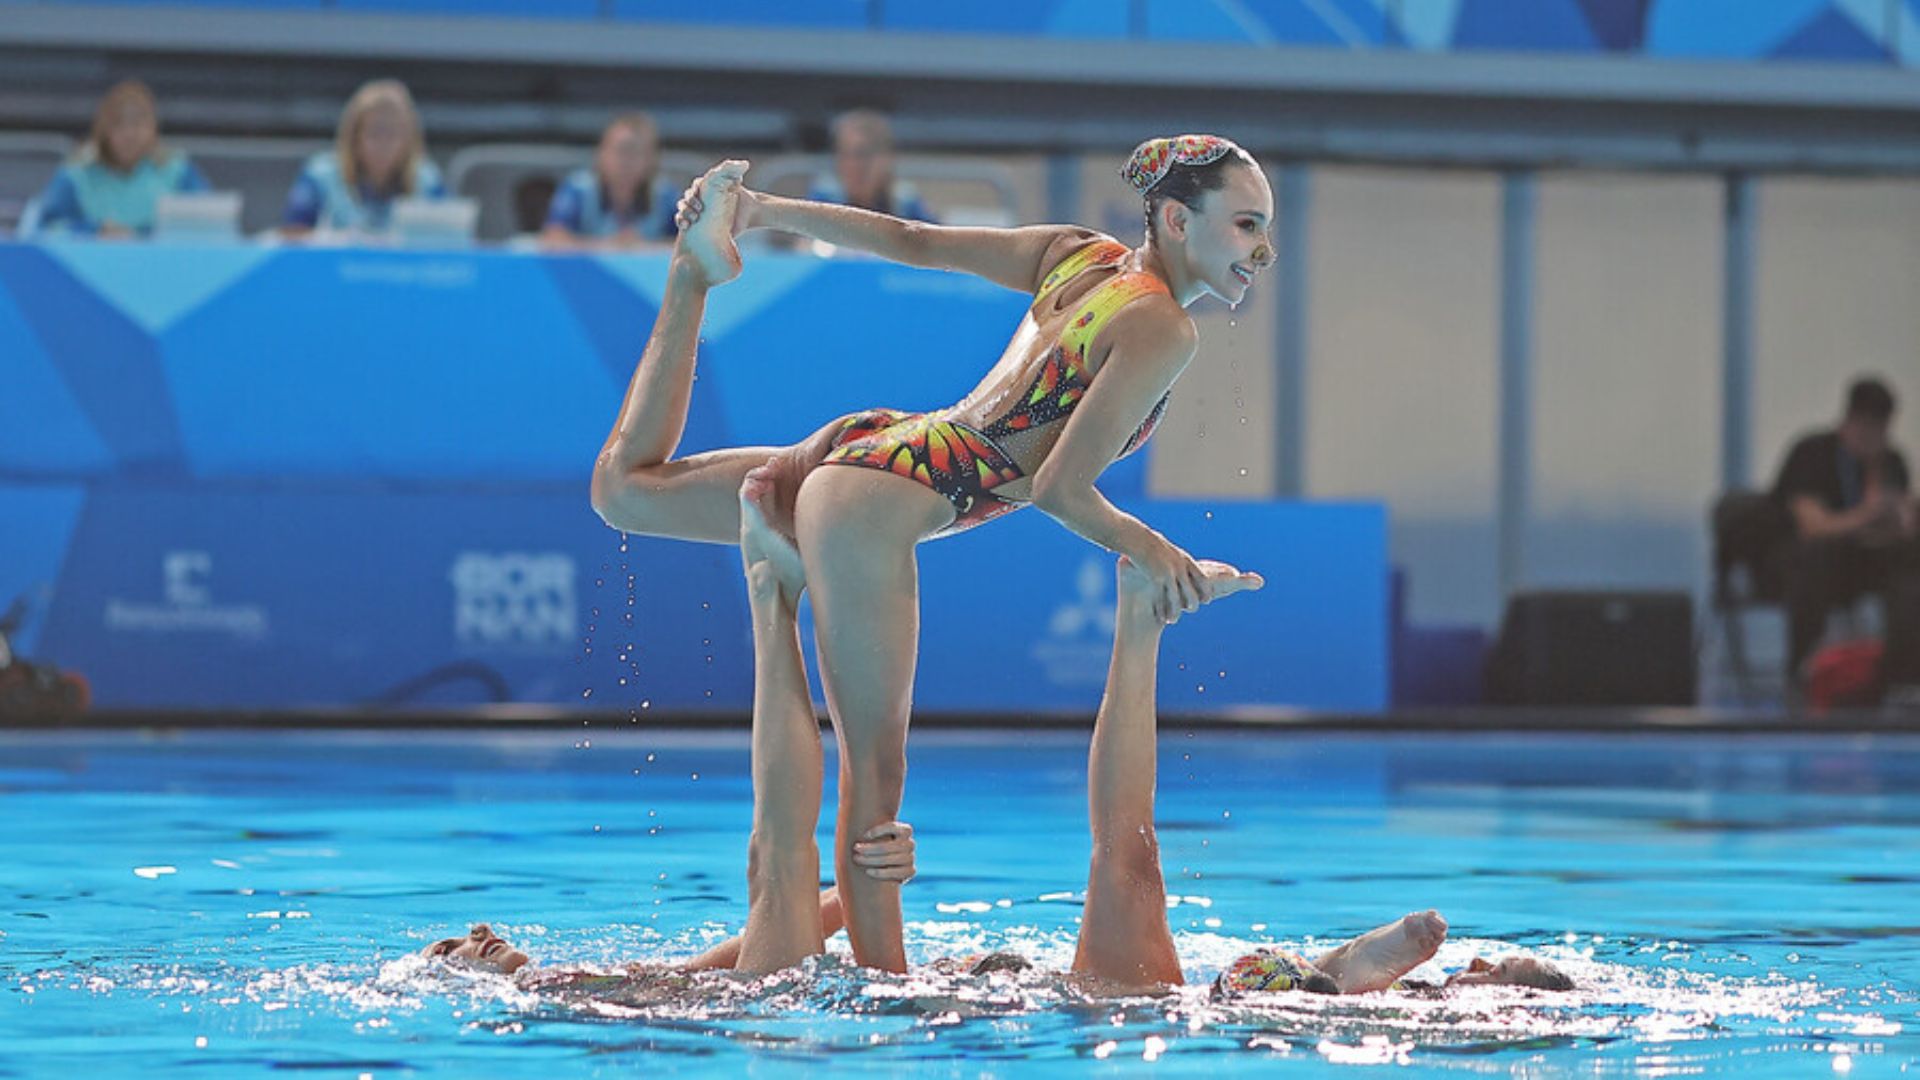 Mexico keeps dominating artistic swimming by teams